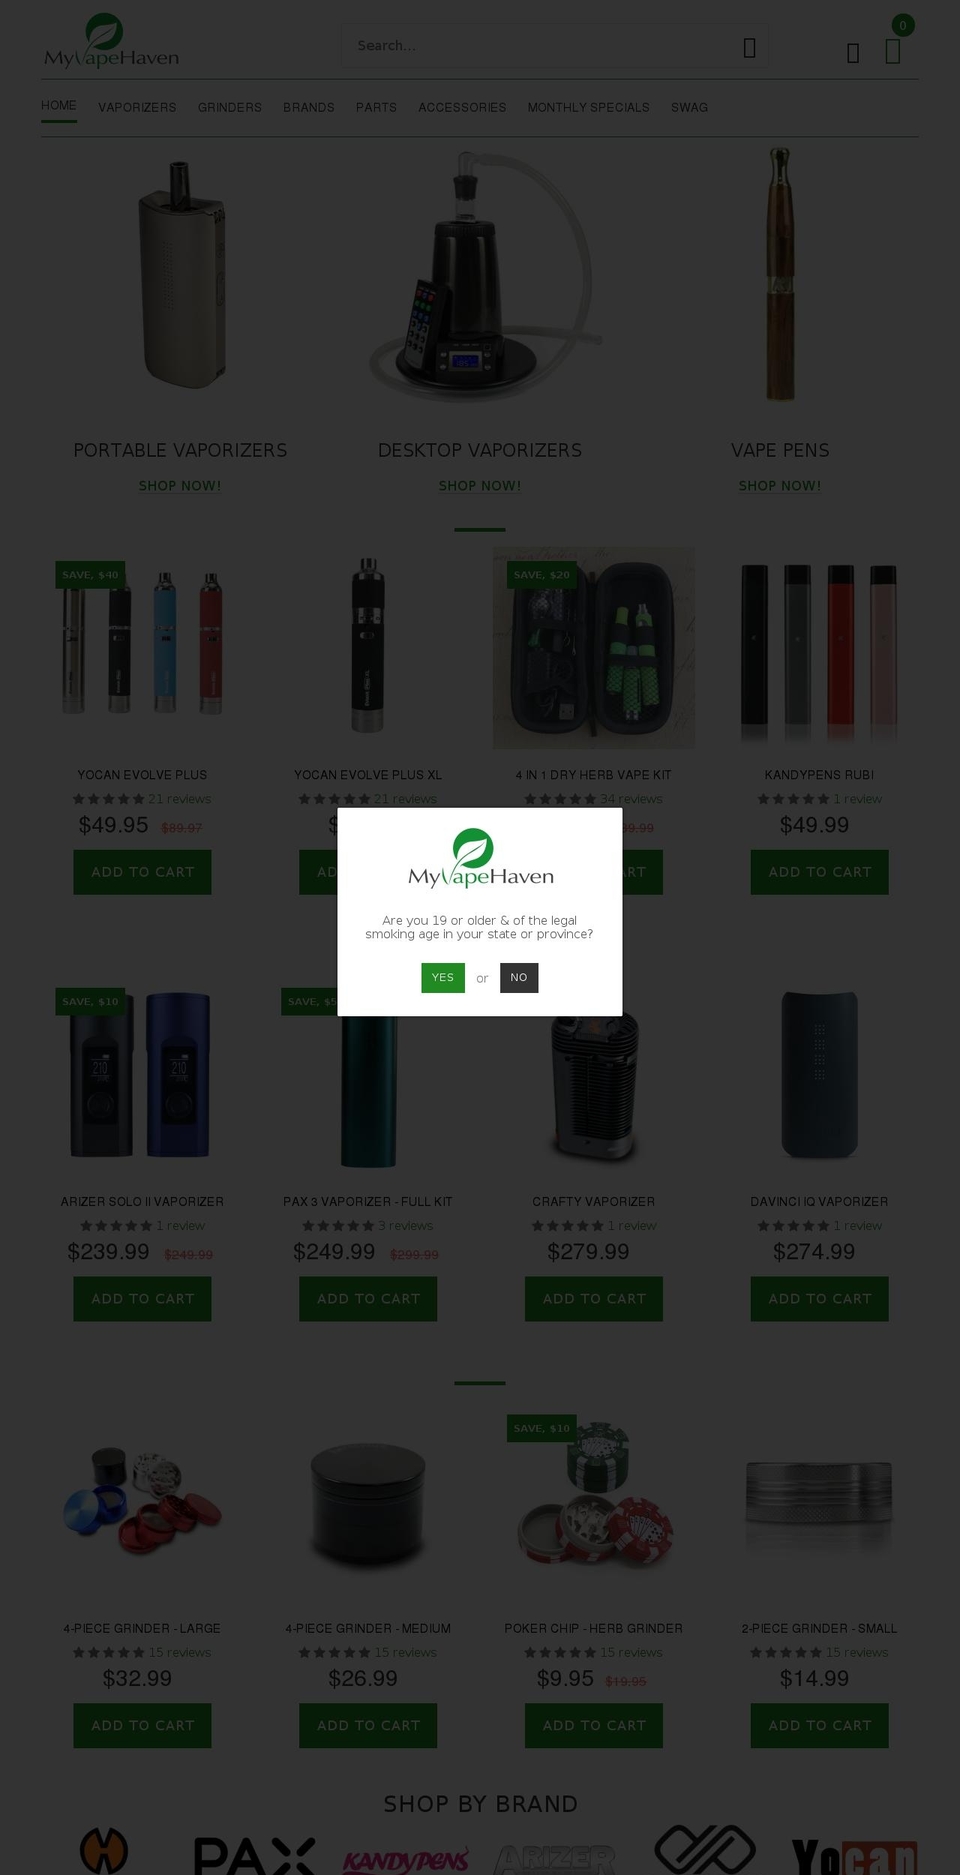 install-me-yourstore-v2-1-9 Shopify theme site example myvapehaven.com